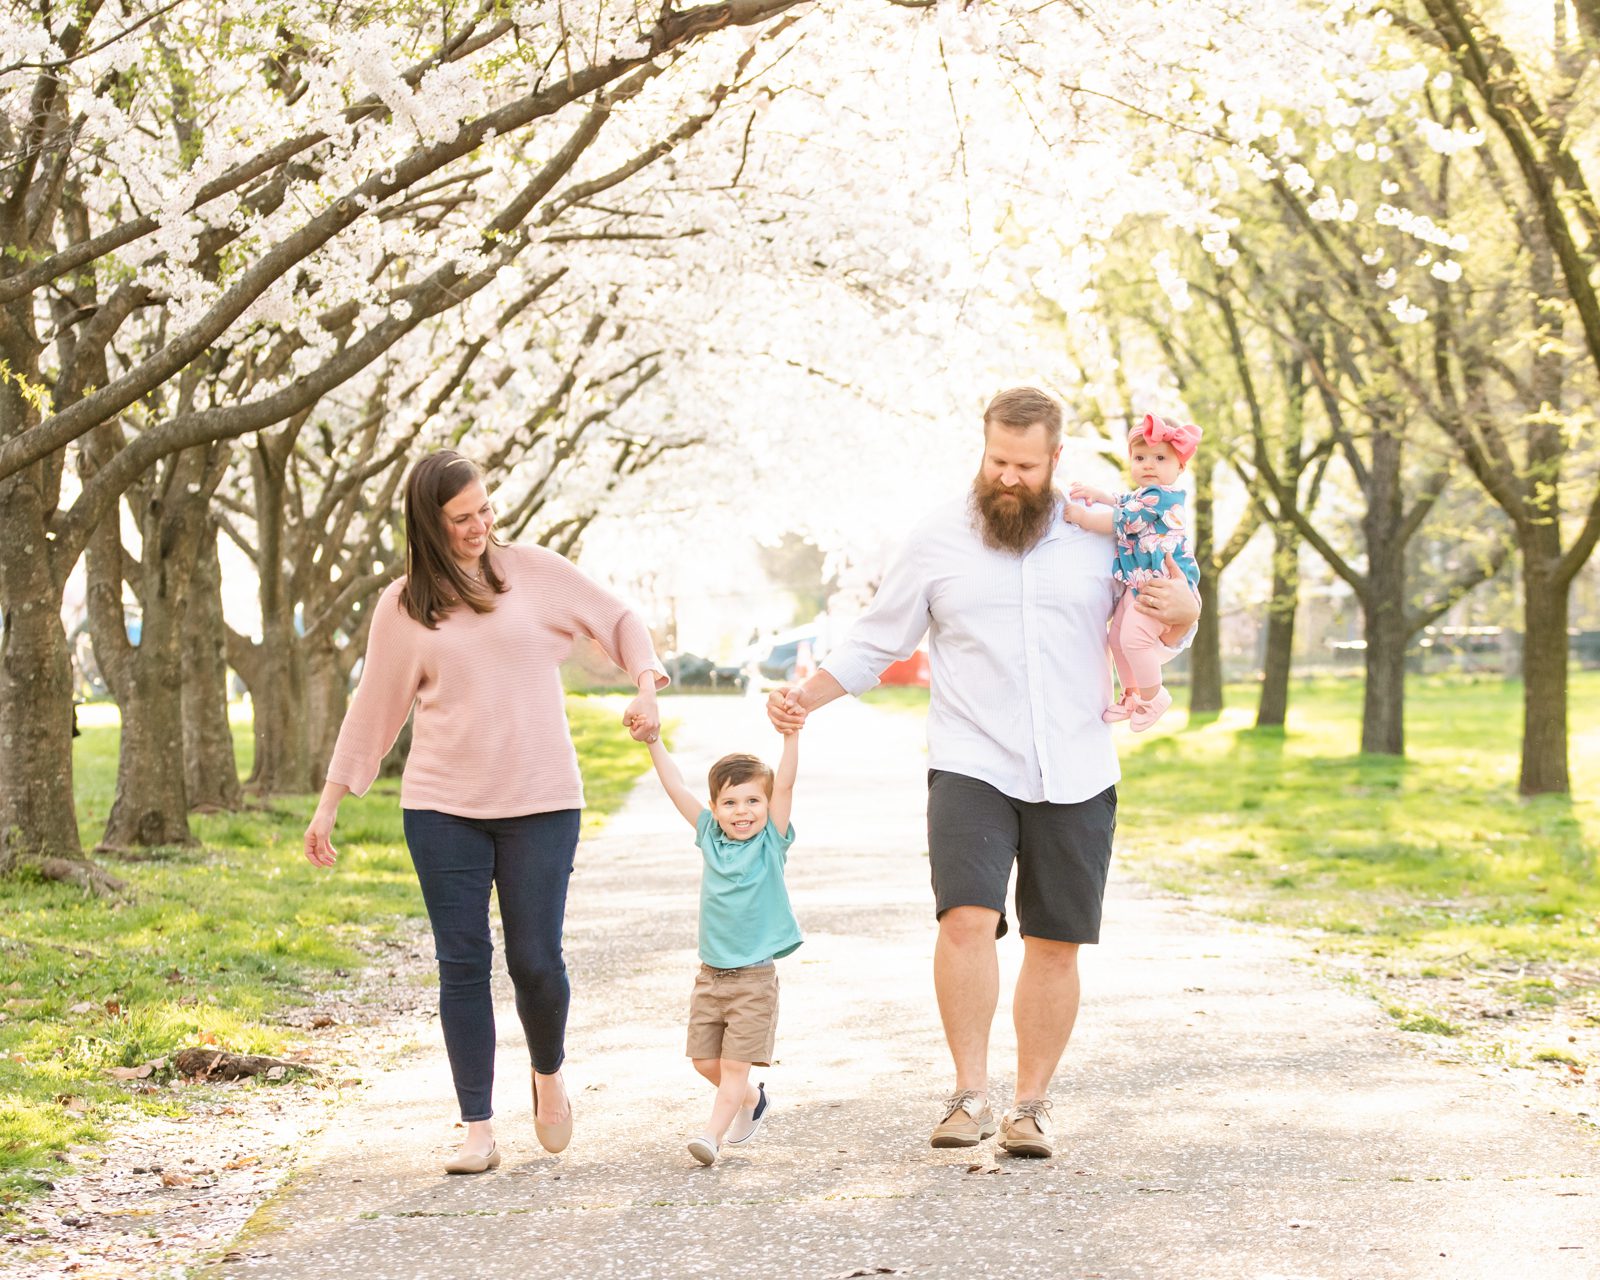 A family of four walking on a path  lined with cherry blossom trees in bloom during a spring photo session